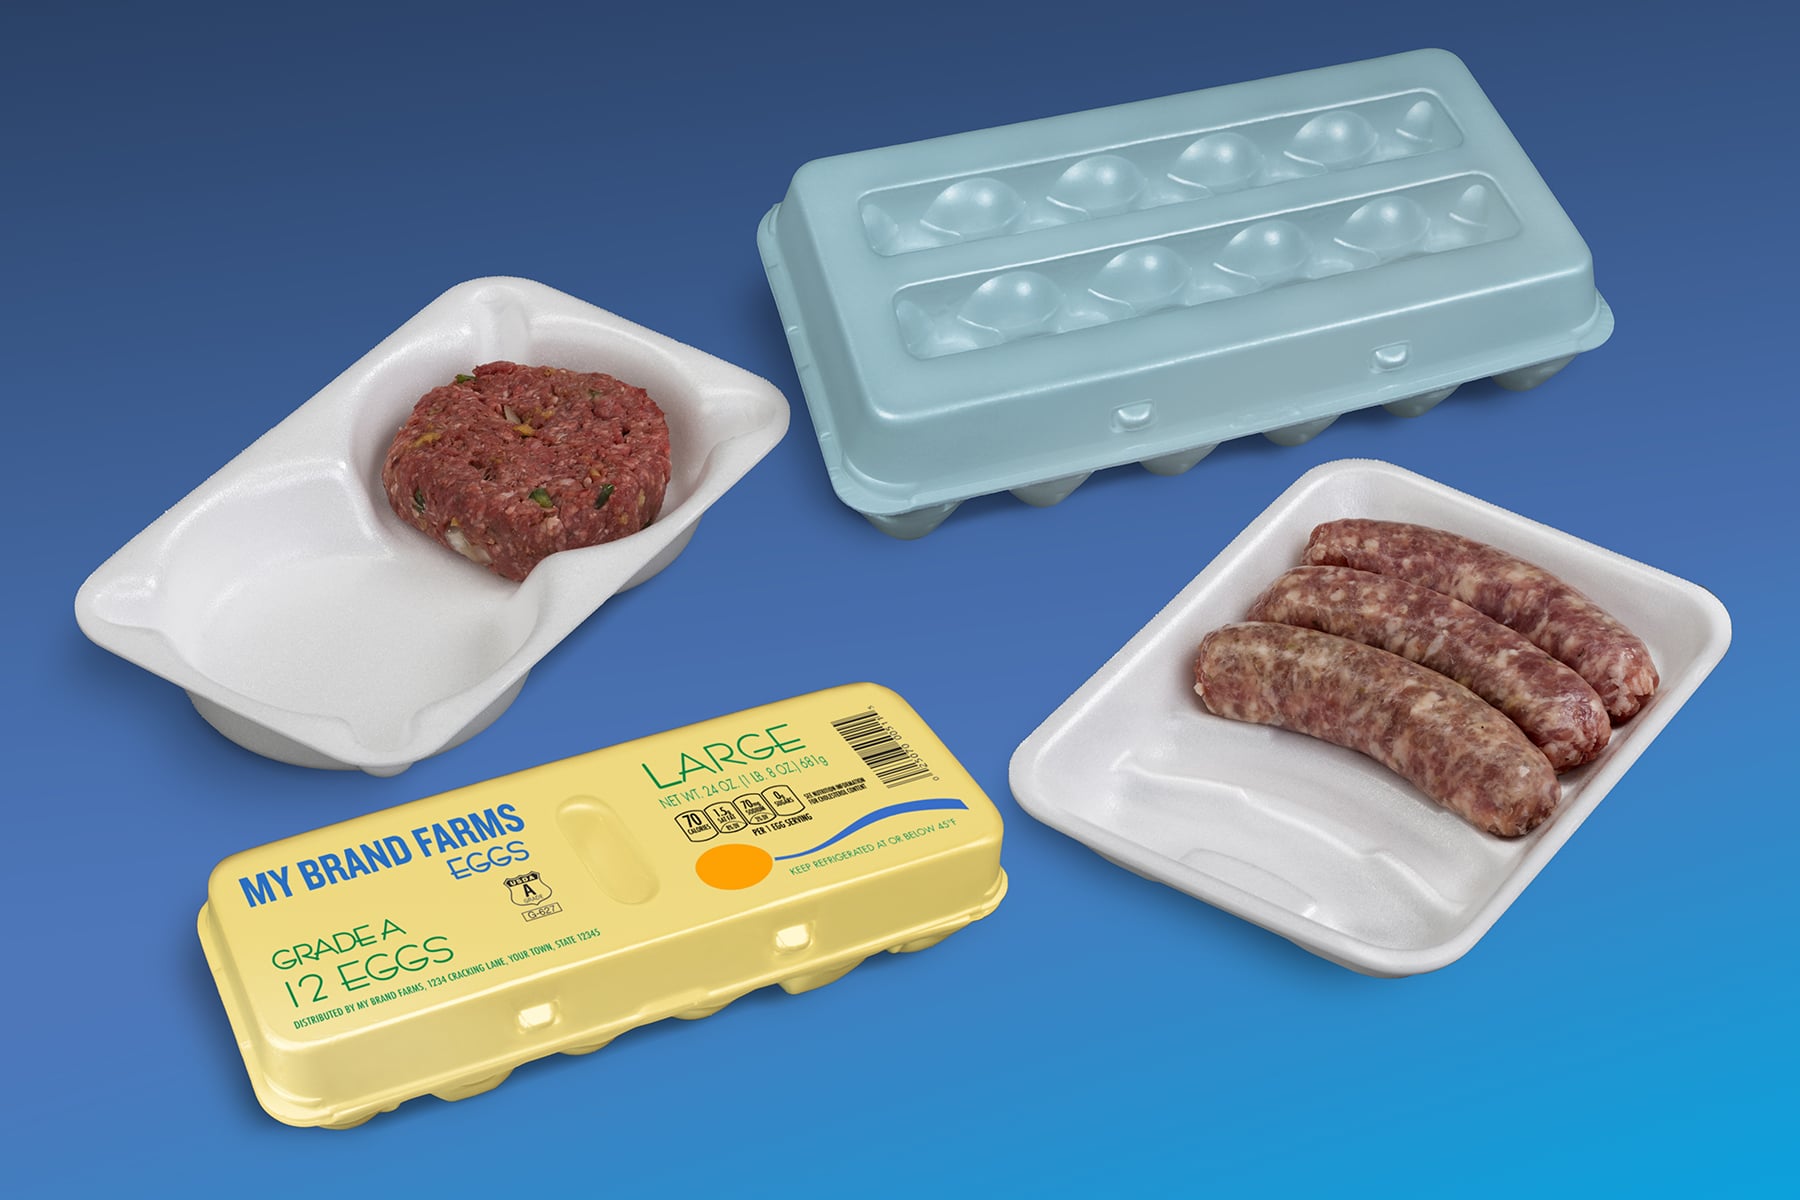 Dolco egg cartons and processor trays